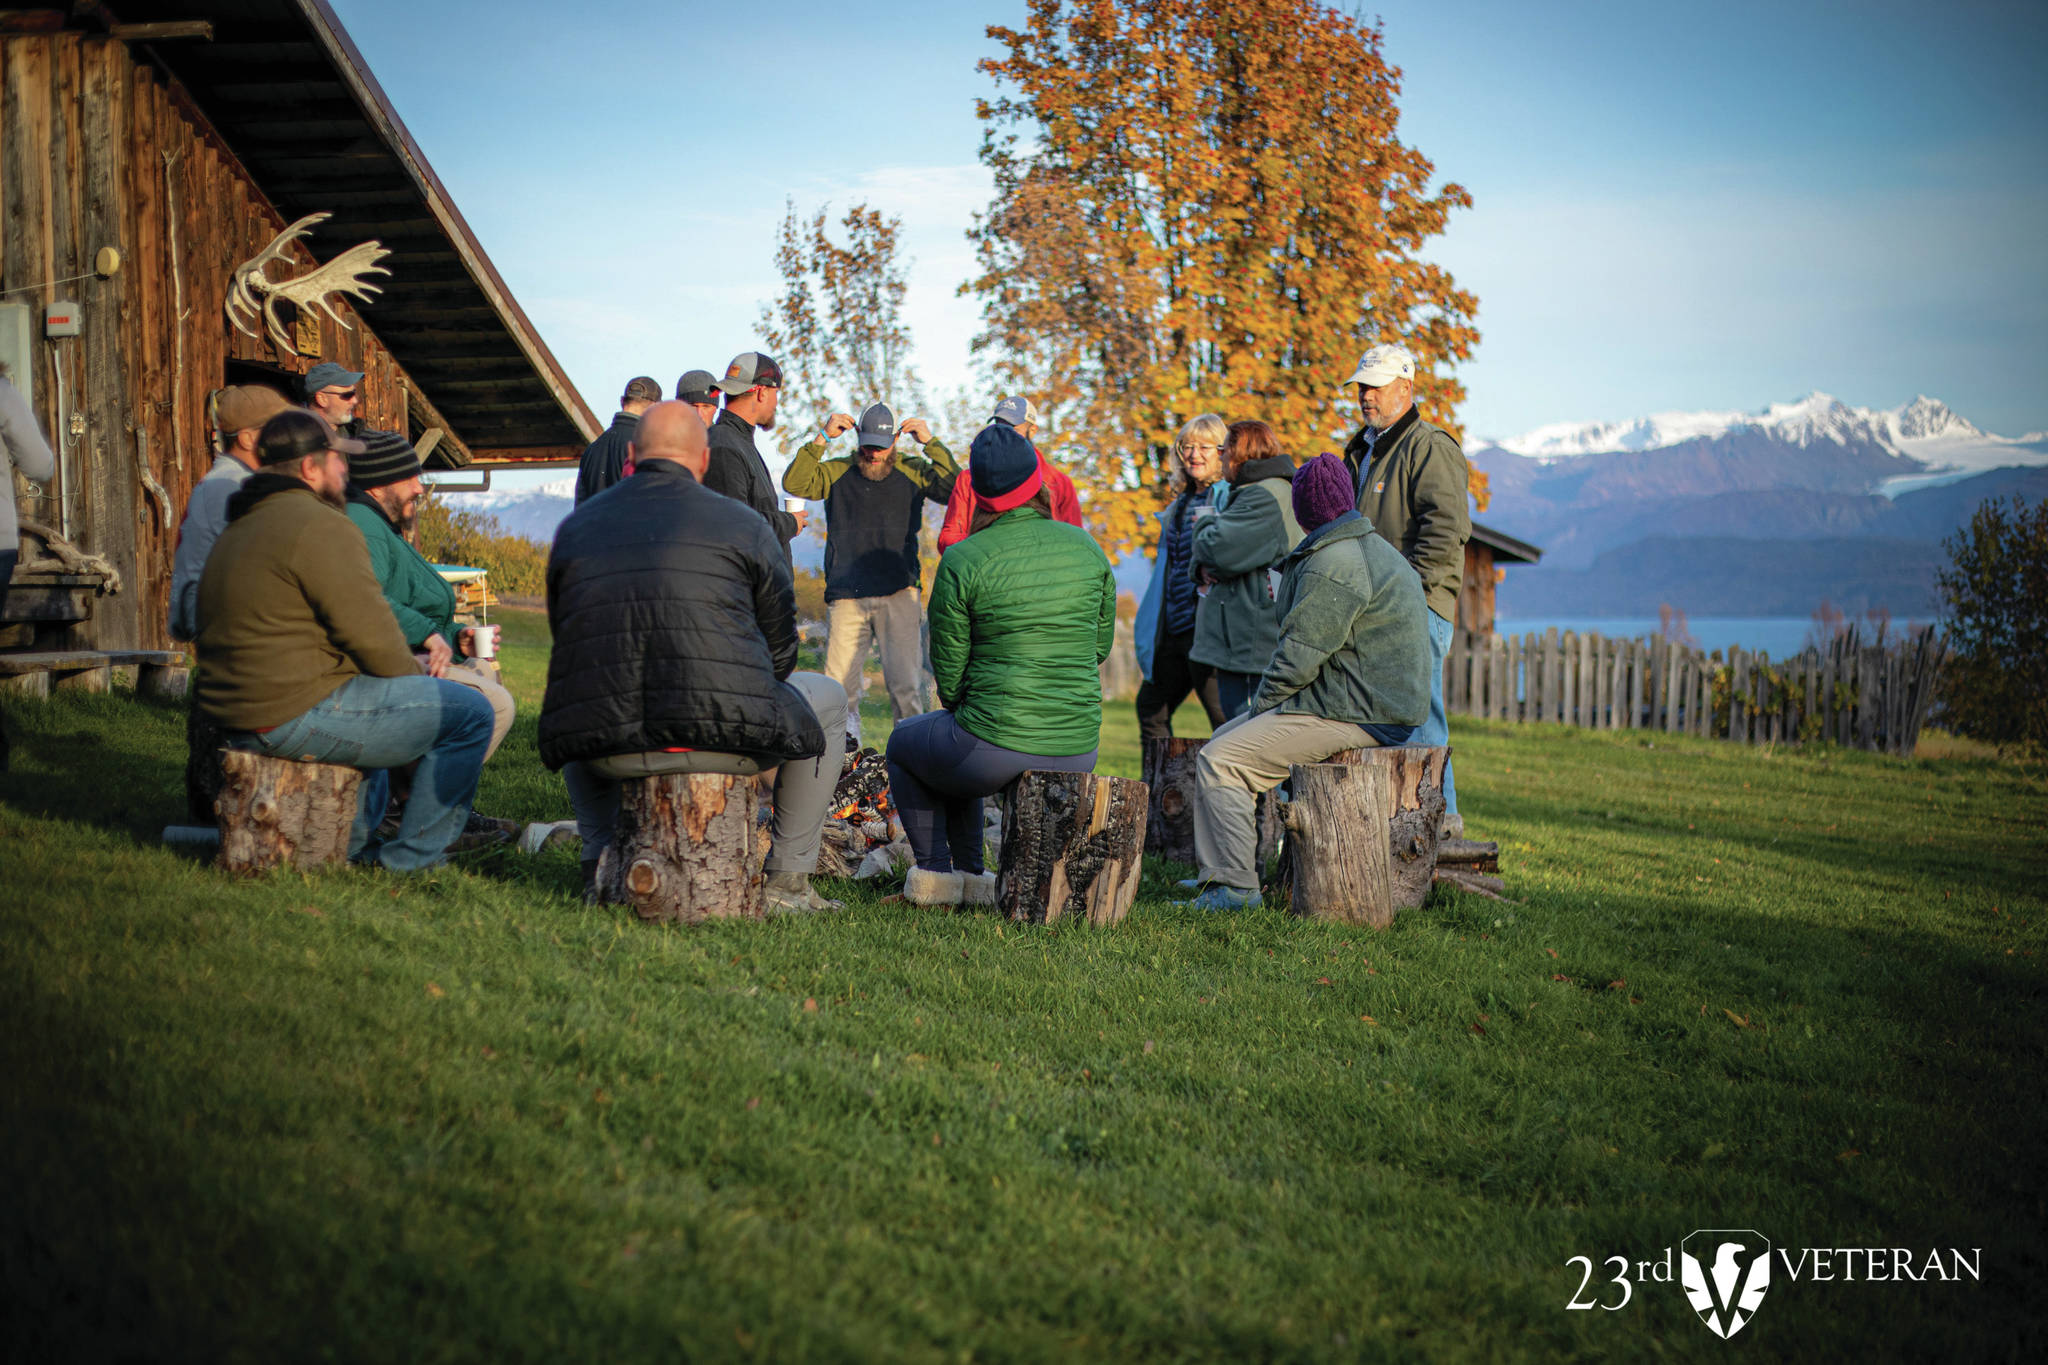 A group of veterans who participated in the 23rd Veteran trip to Homer, Alaska, sit around a campfire at the Kilcher Family Homestead on the last day of the trip on Friday, Oct. 16, 2020, near Homer, Alaska. (Photo courtesy of 23rd Veteran)